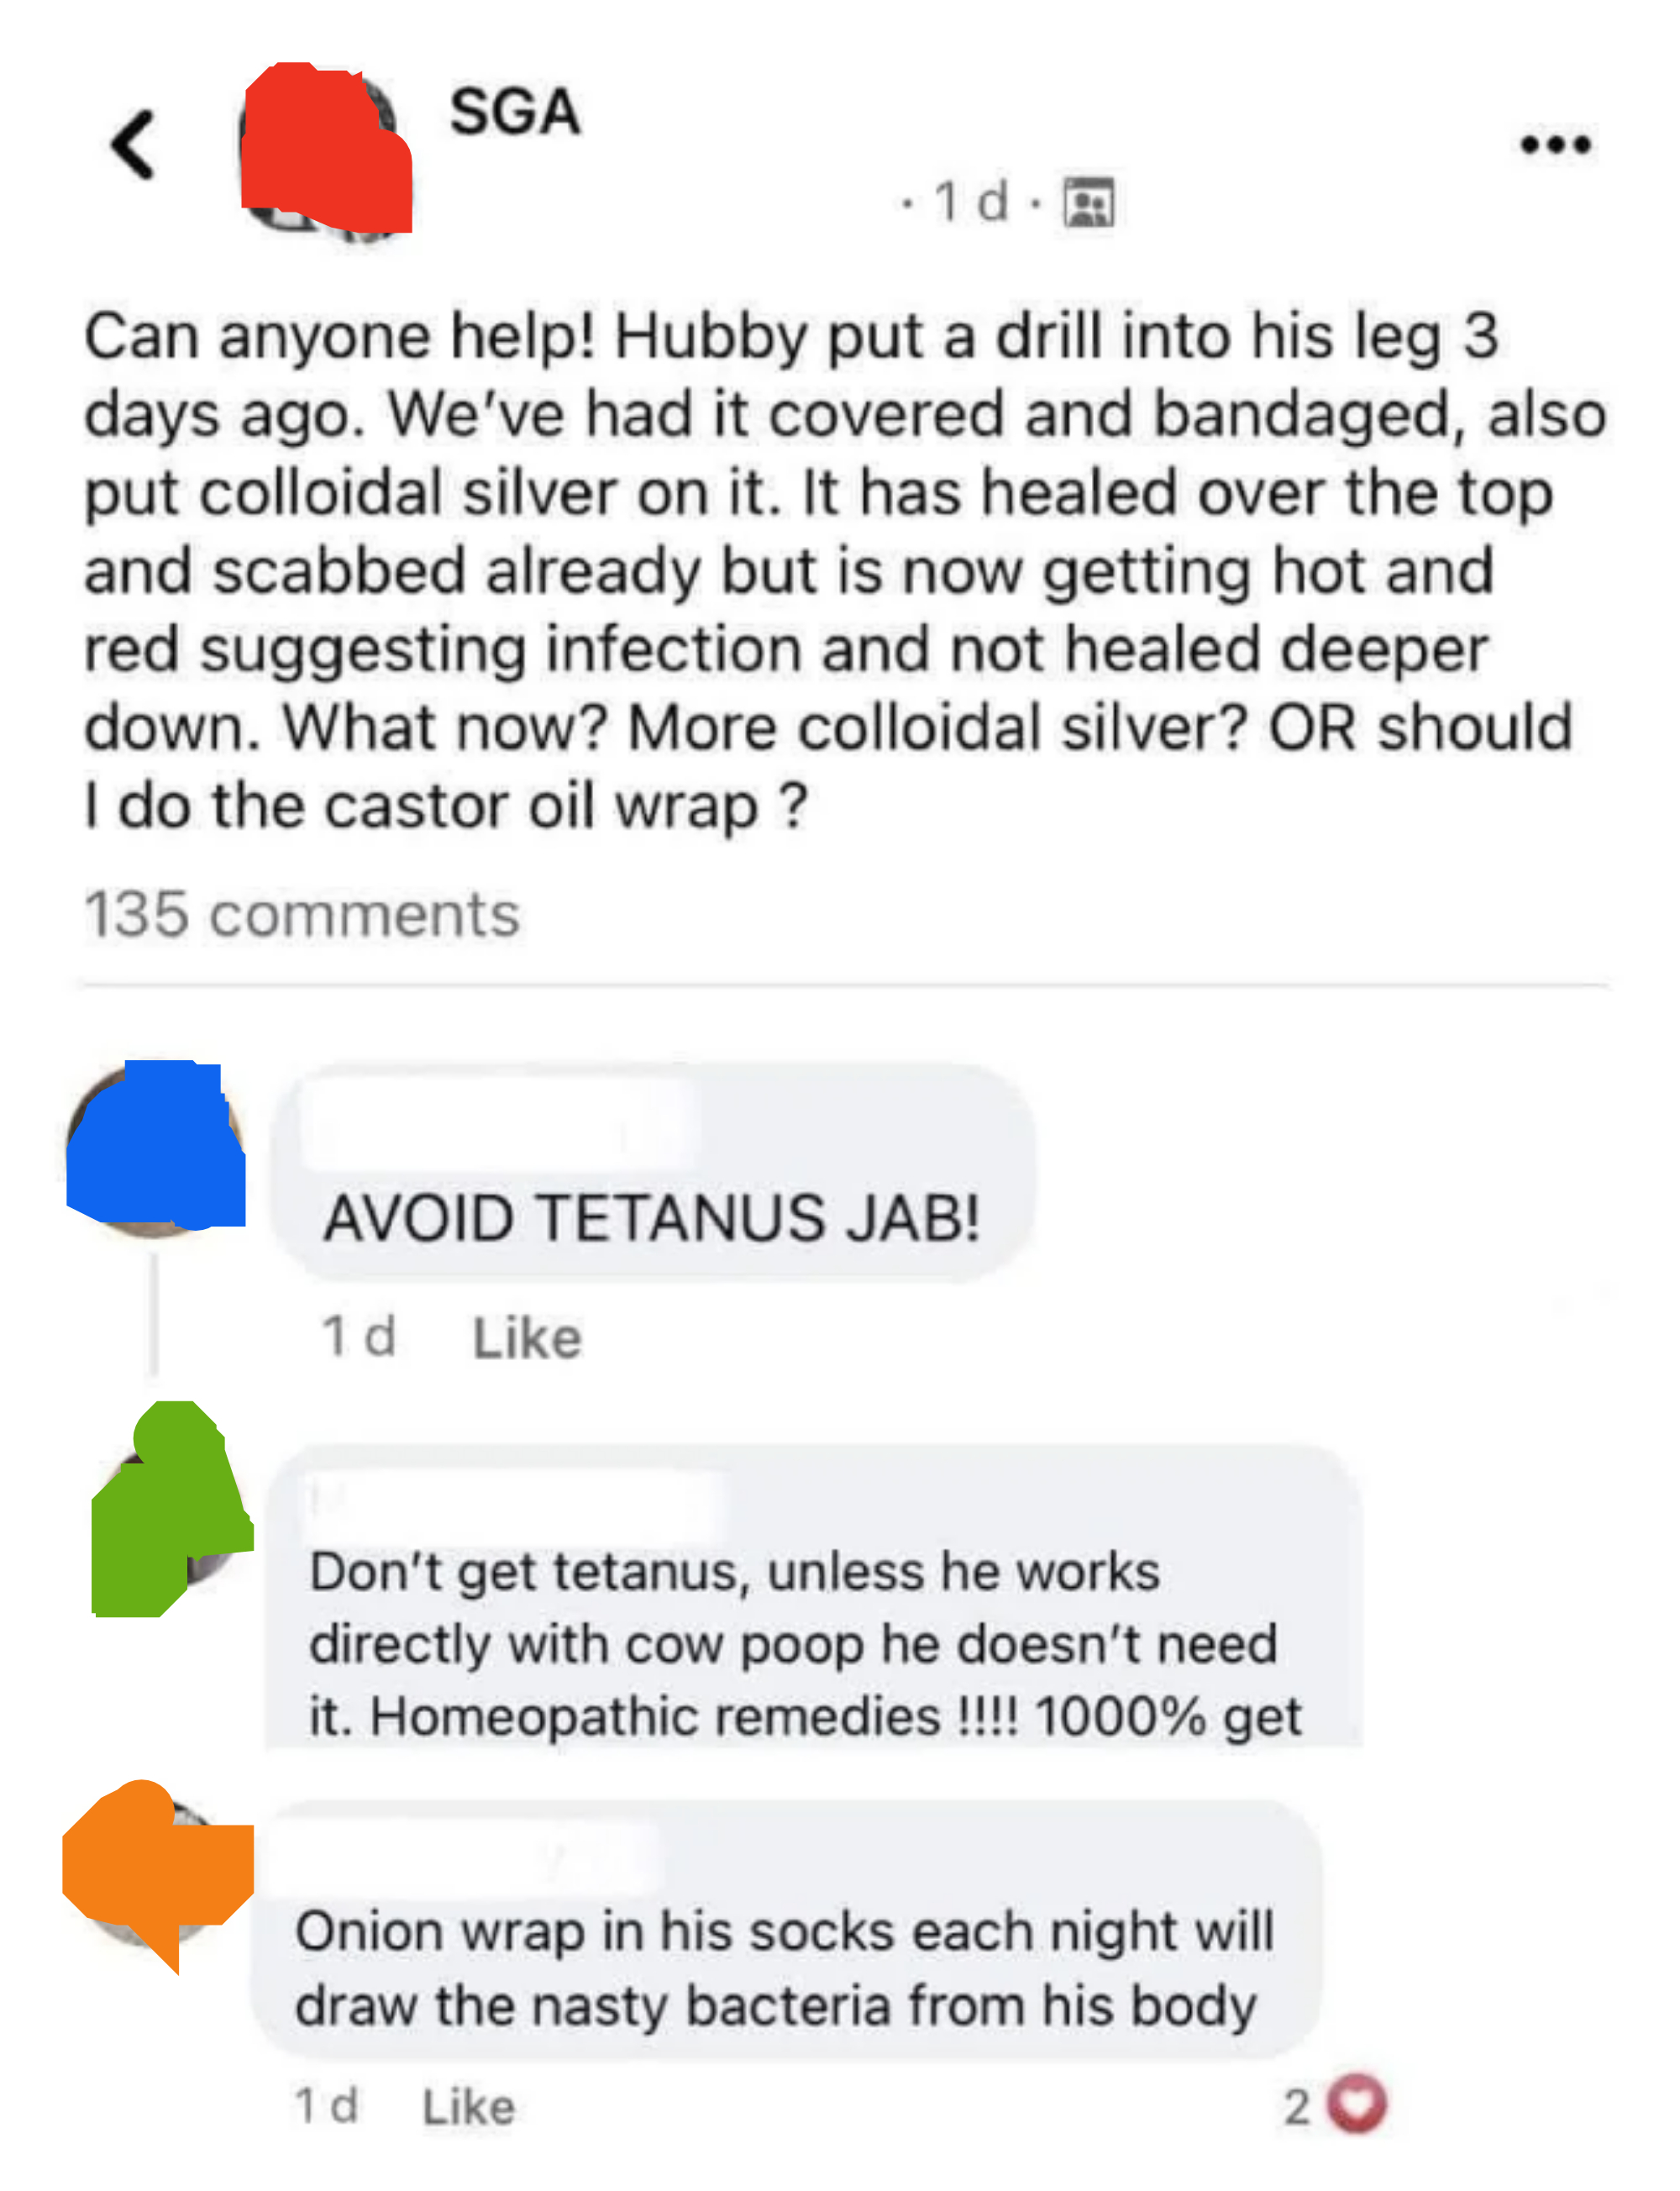 Screenshot of a social media conversation where individuals discuss remedies for a husband&#x27;s leg injury, with suggestions for alternative medicine